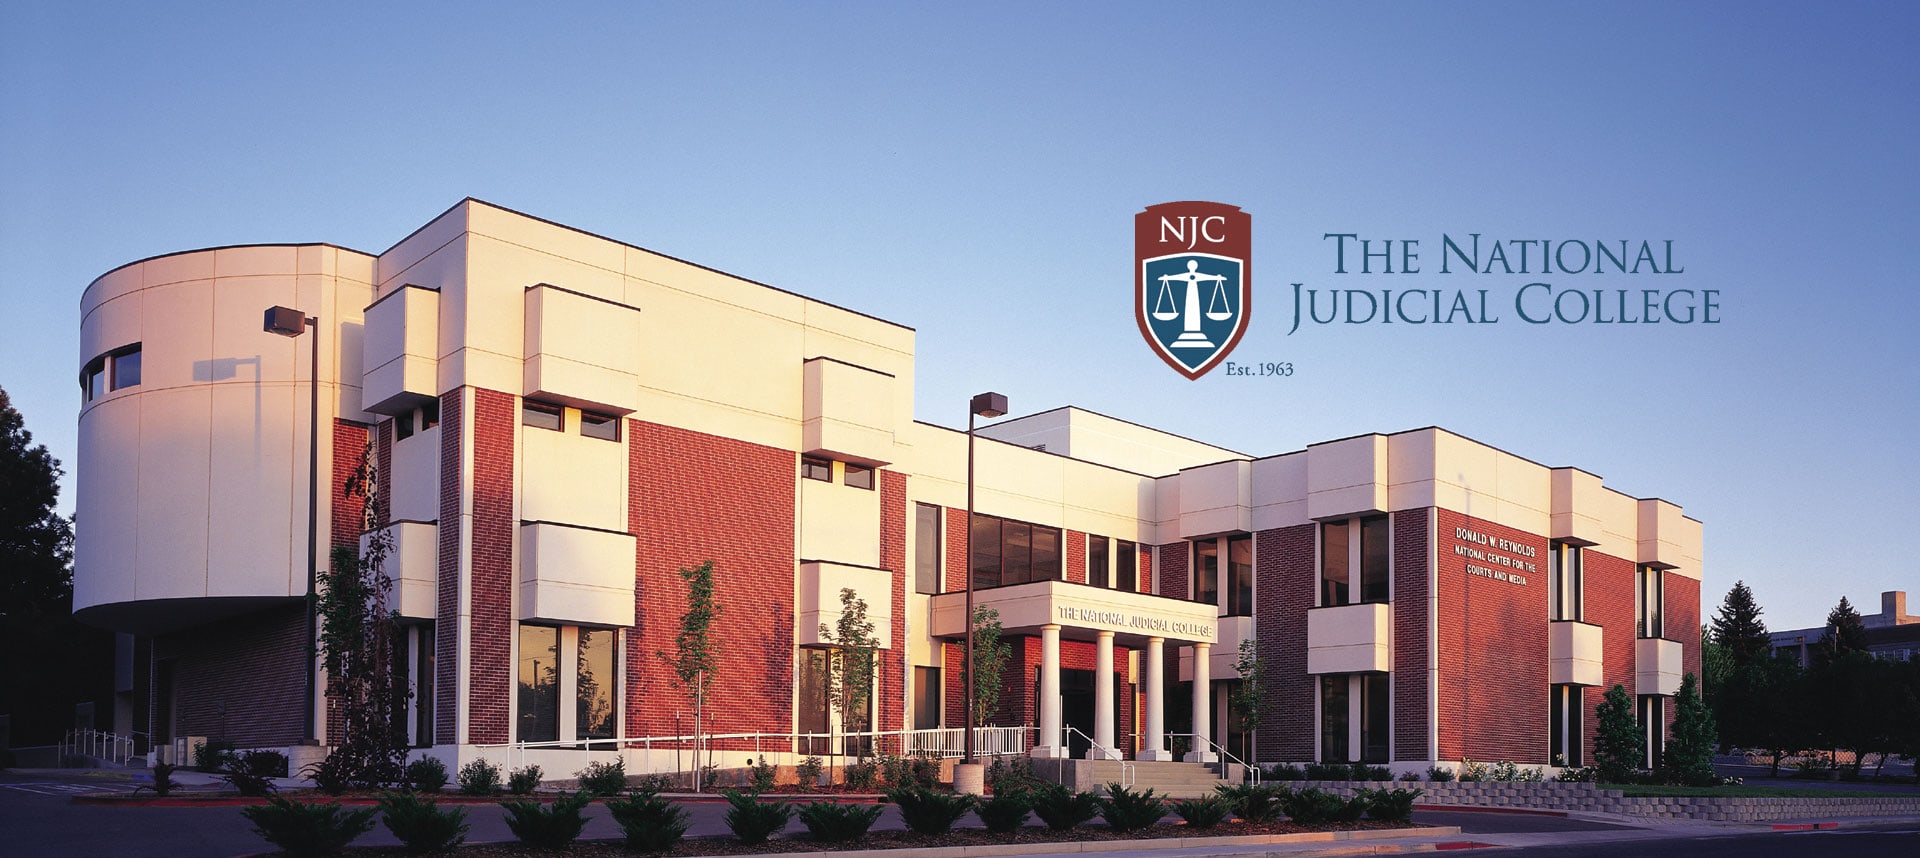 NJC Building and logo